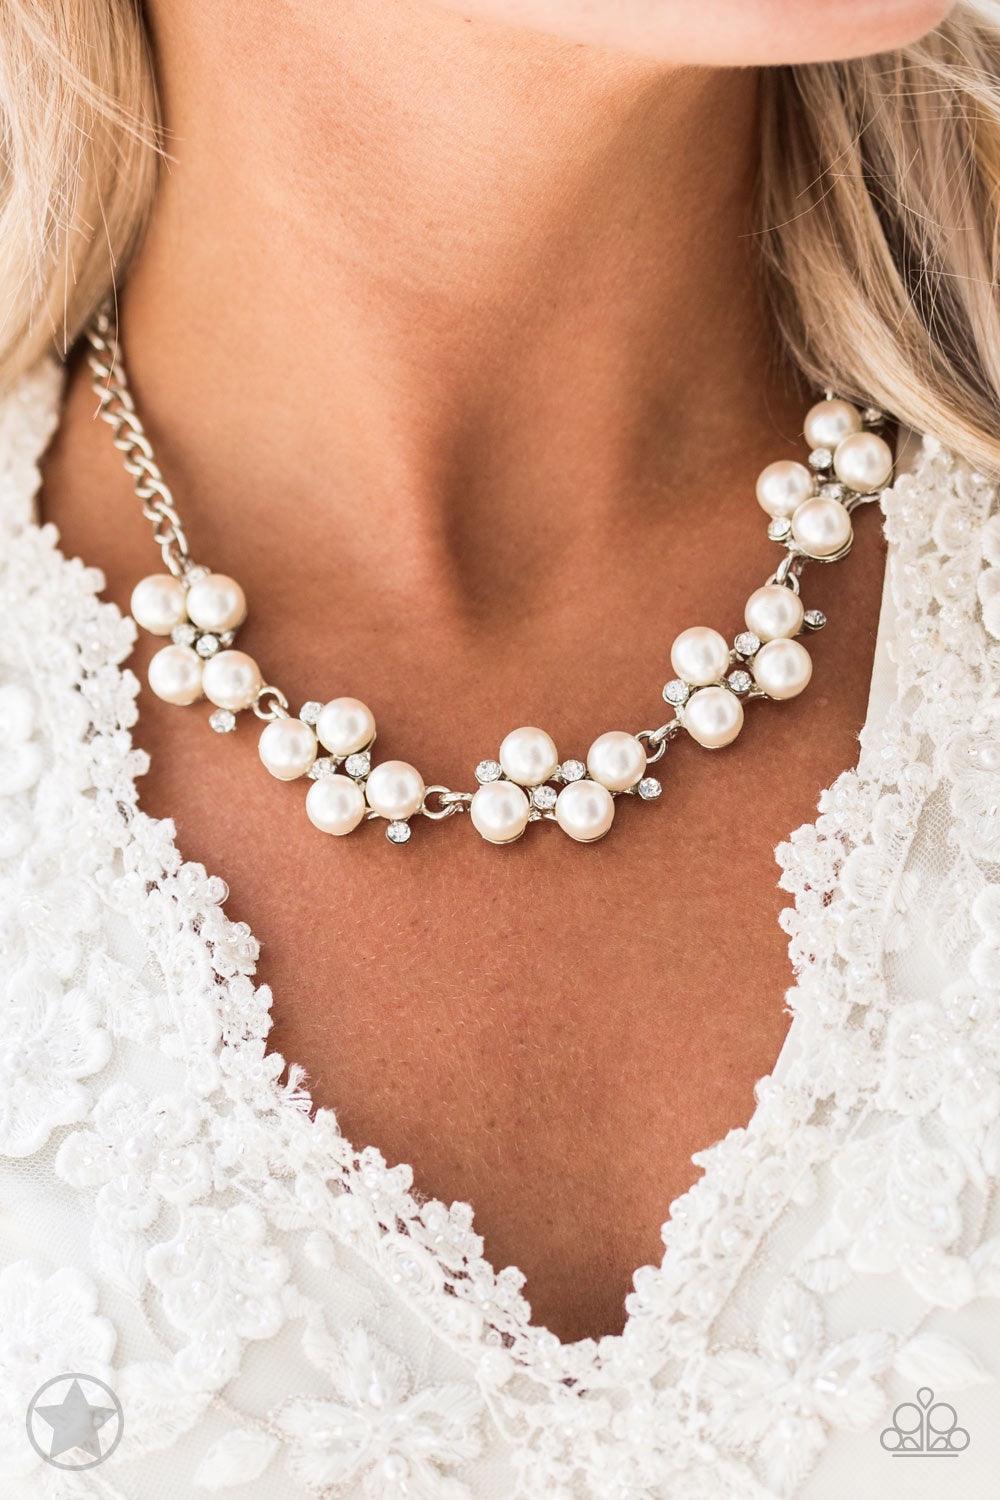 Paparazzi Accessories Love Story - White Dainty clusters of shimmery white pearls are dusted with sparkling rhinestones, creating a romantic, timeless design. Features an adjustable clasp closure. Jewelry